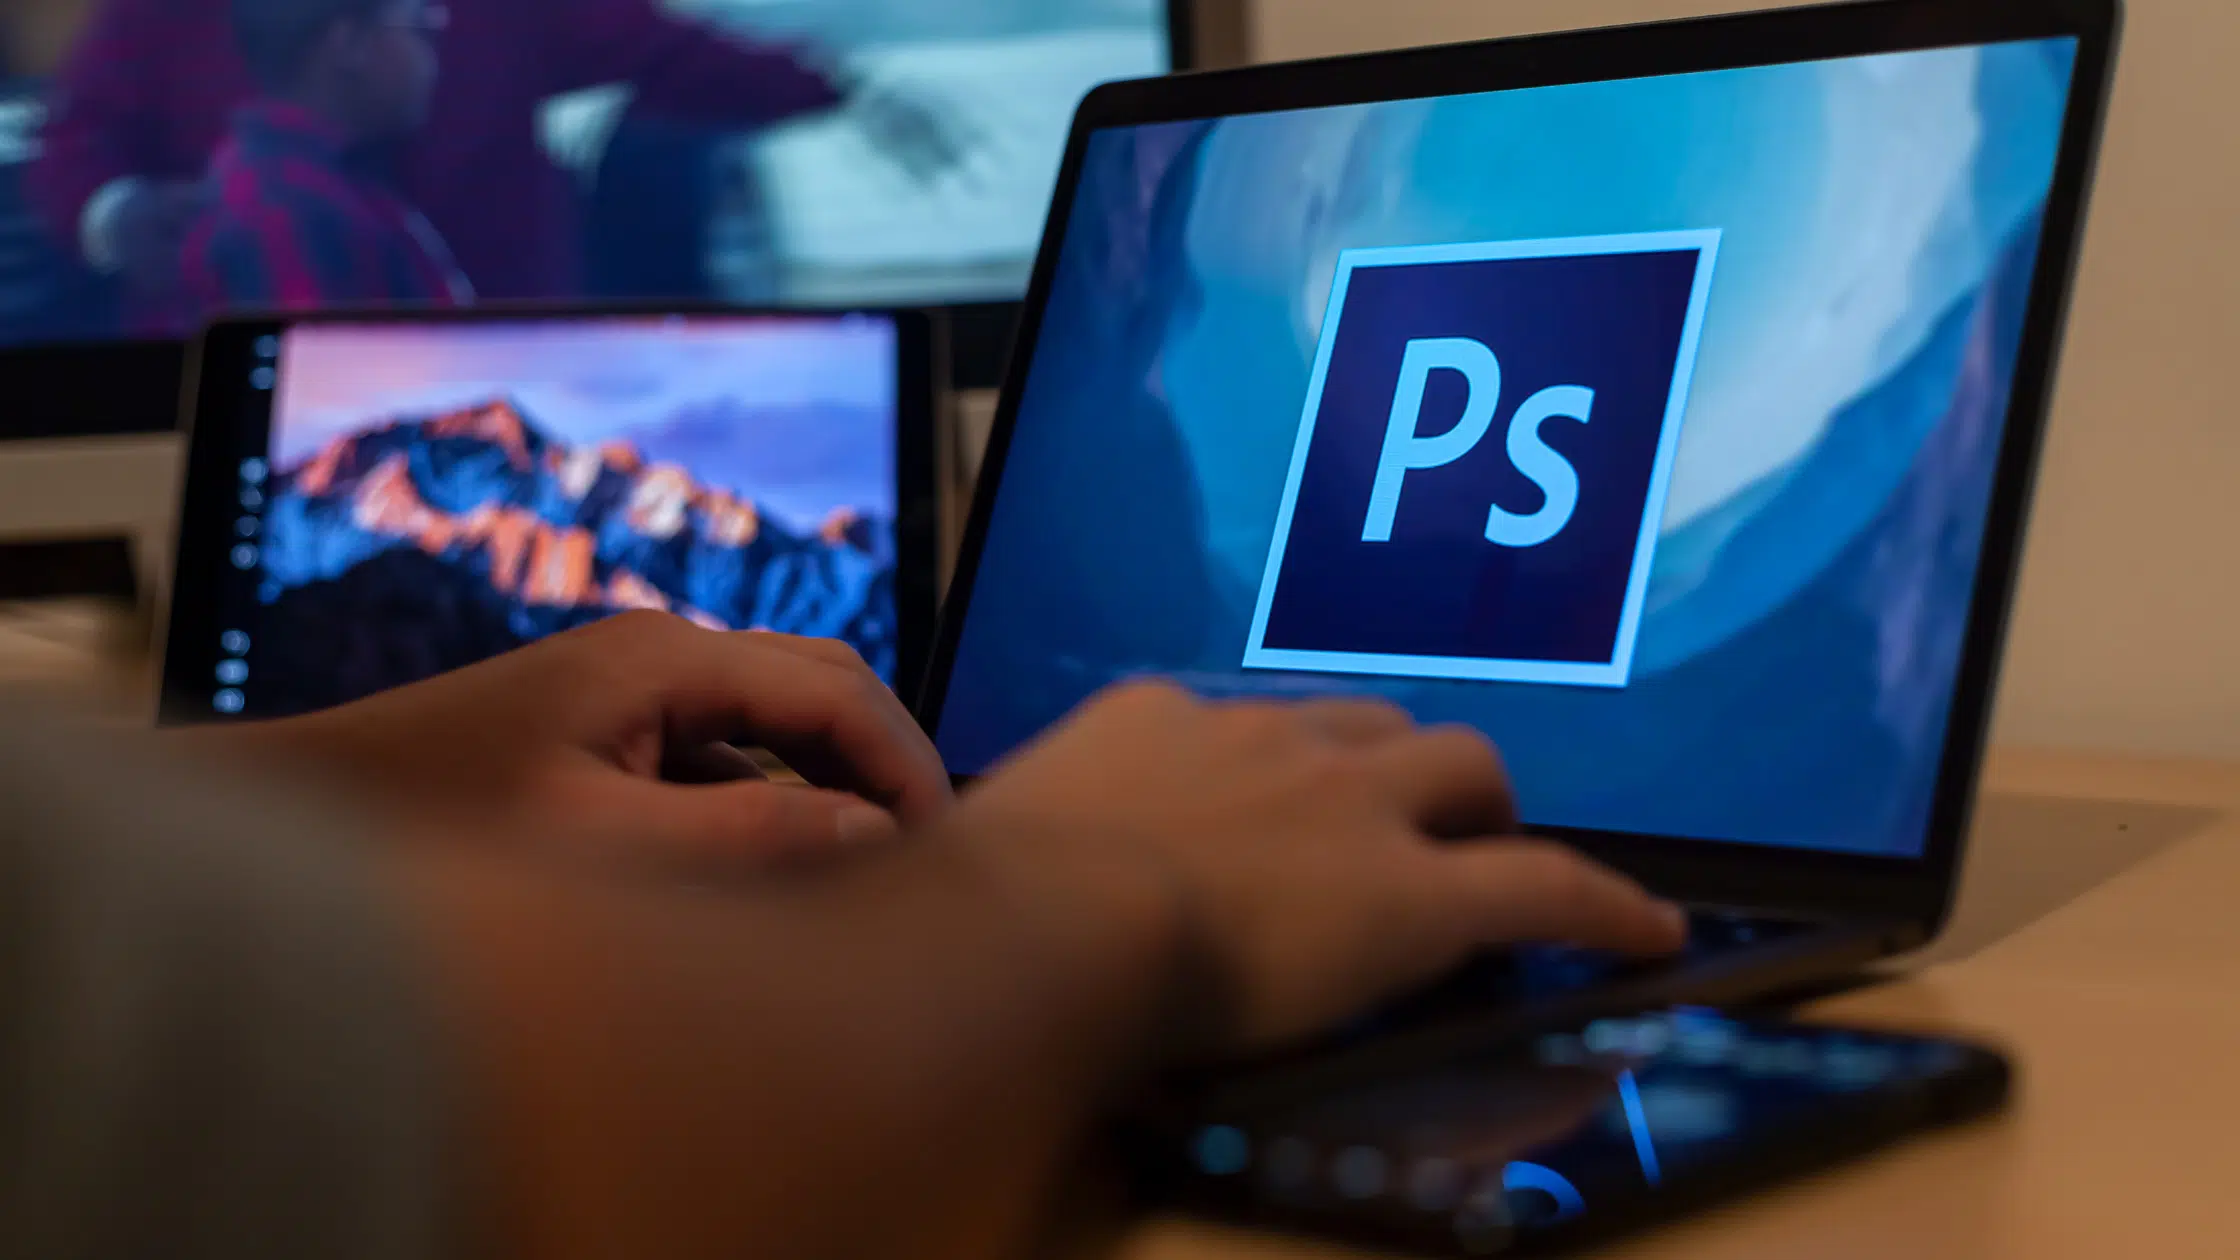 How to get Photoshop free trial